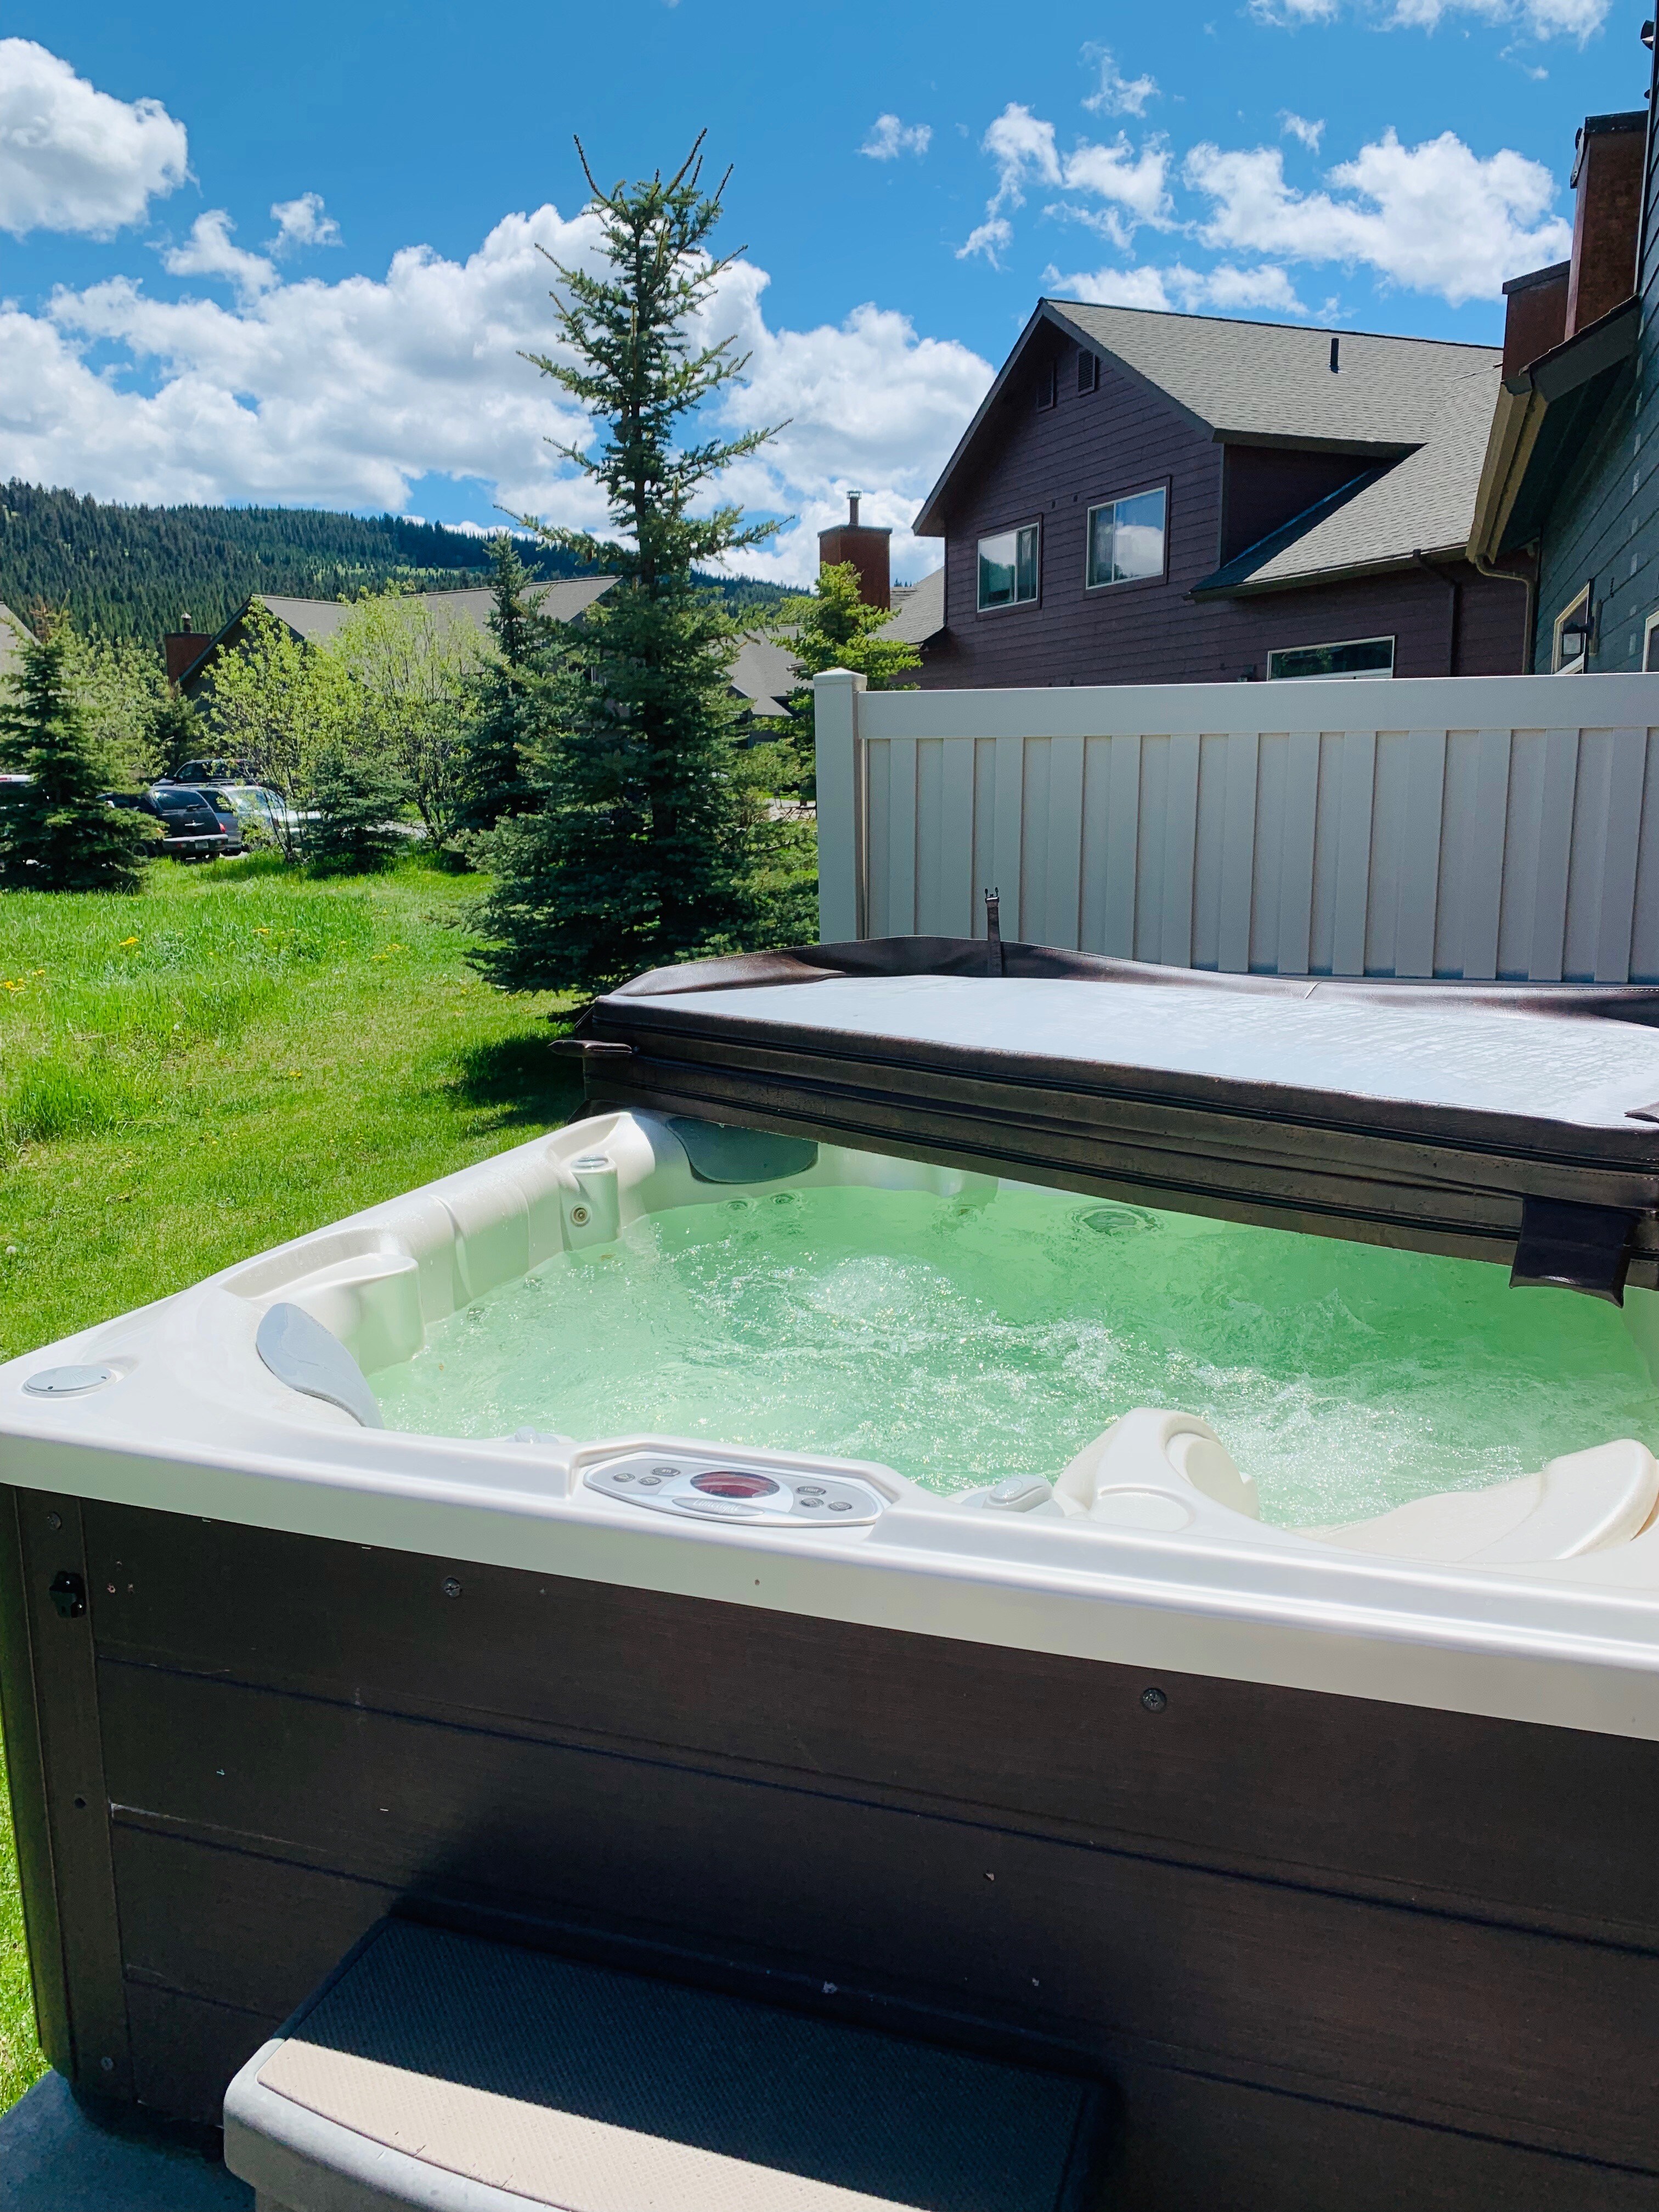 Have a glass of wine in the hot tub | Exterior